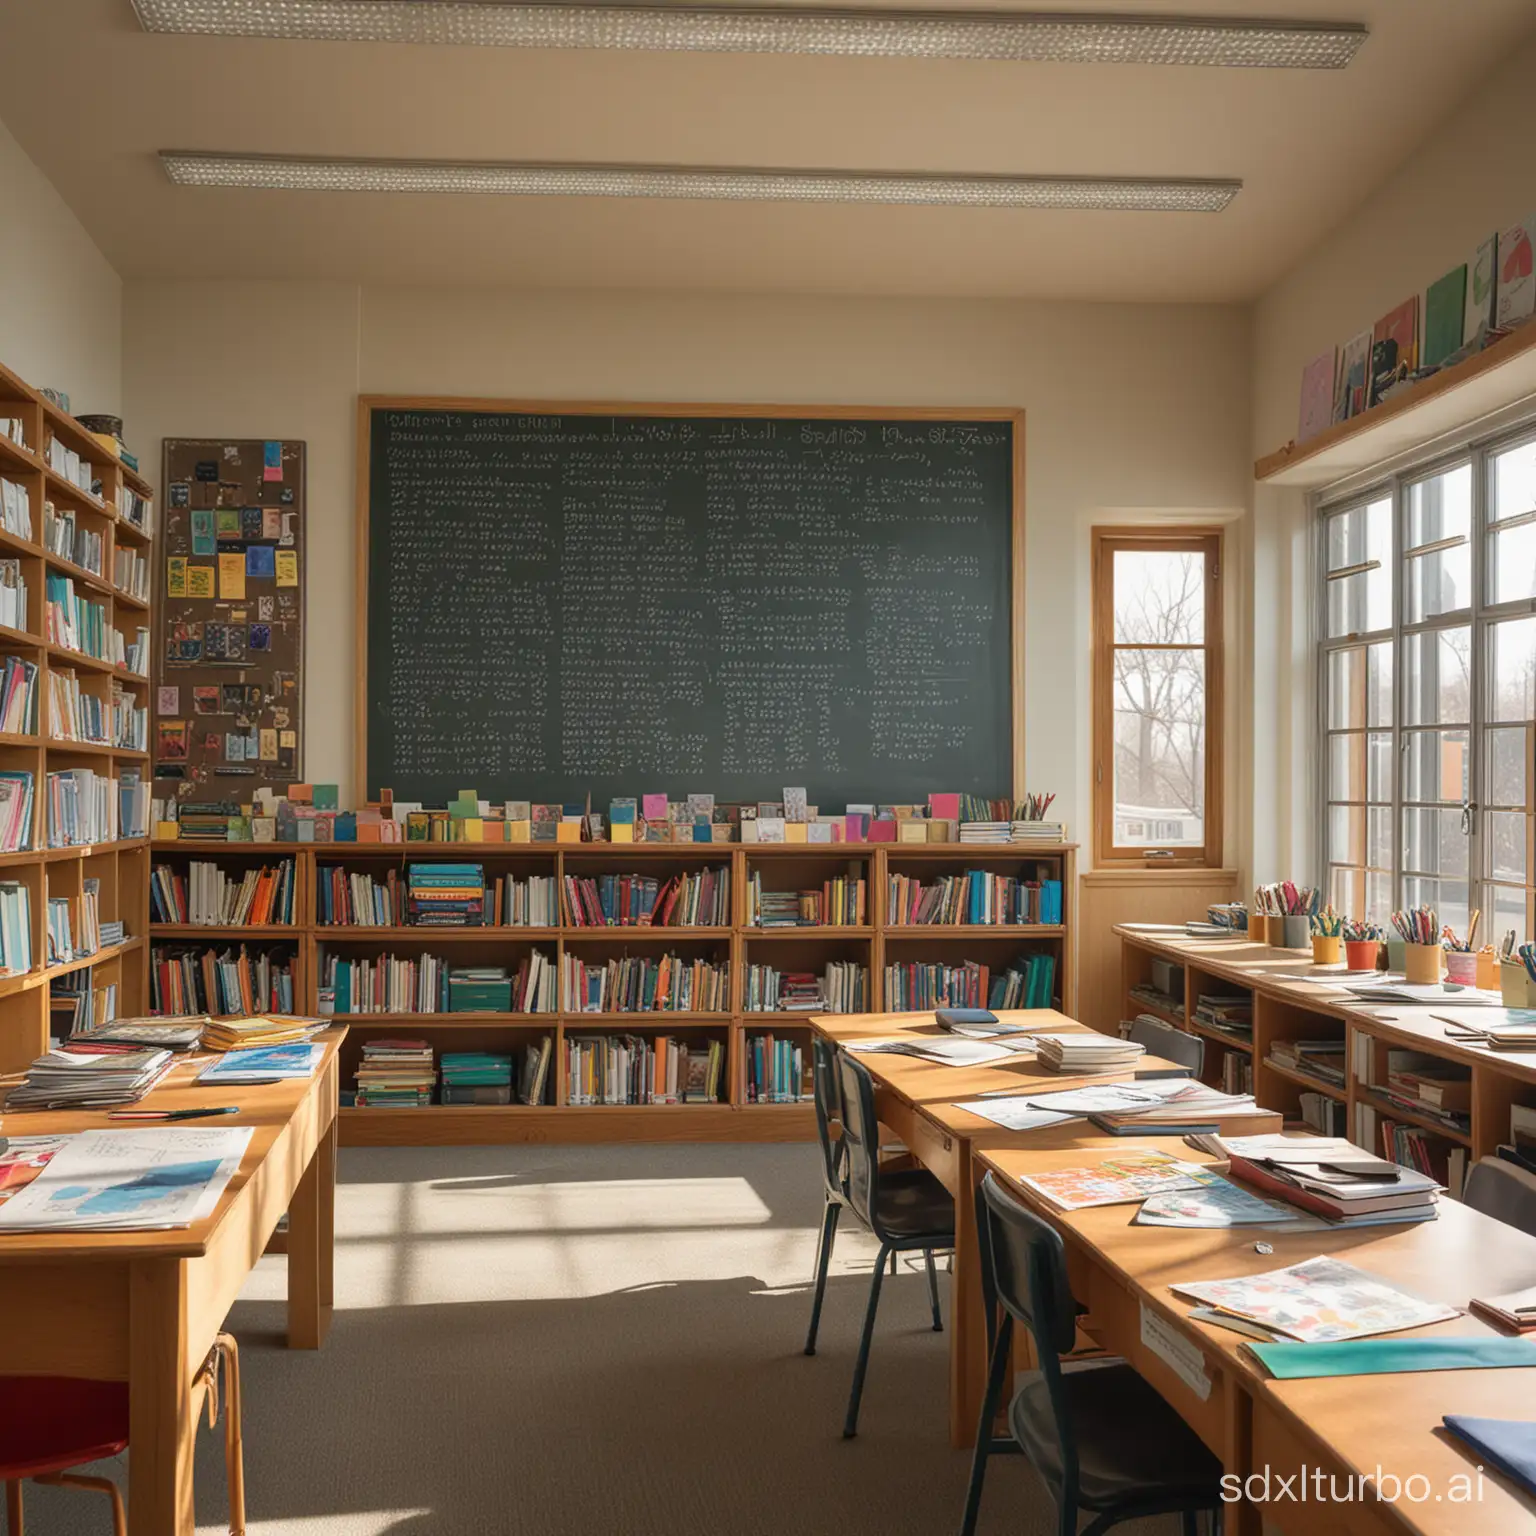 "A classroom scene with a colorful chalkboard filled with drawings and equations, surrounded by shelves stacked with books, desks arranged neatly in rows, and sunlight streaming in through large windows.